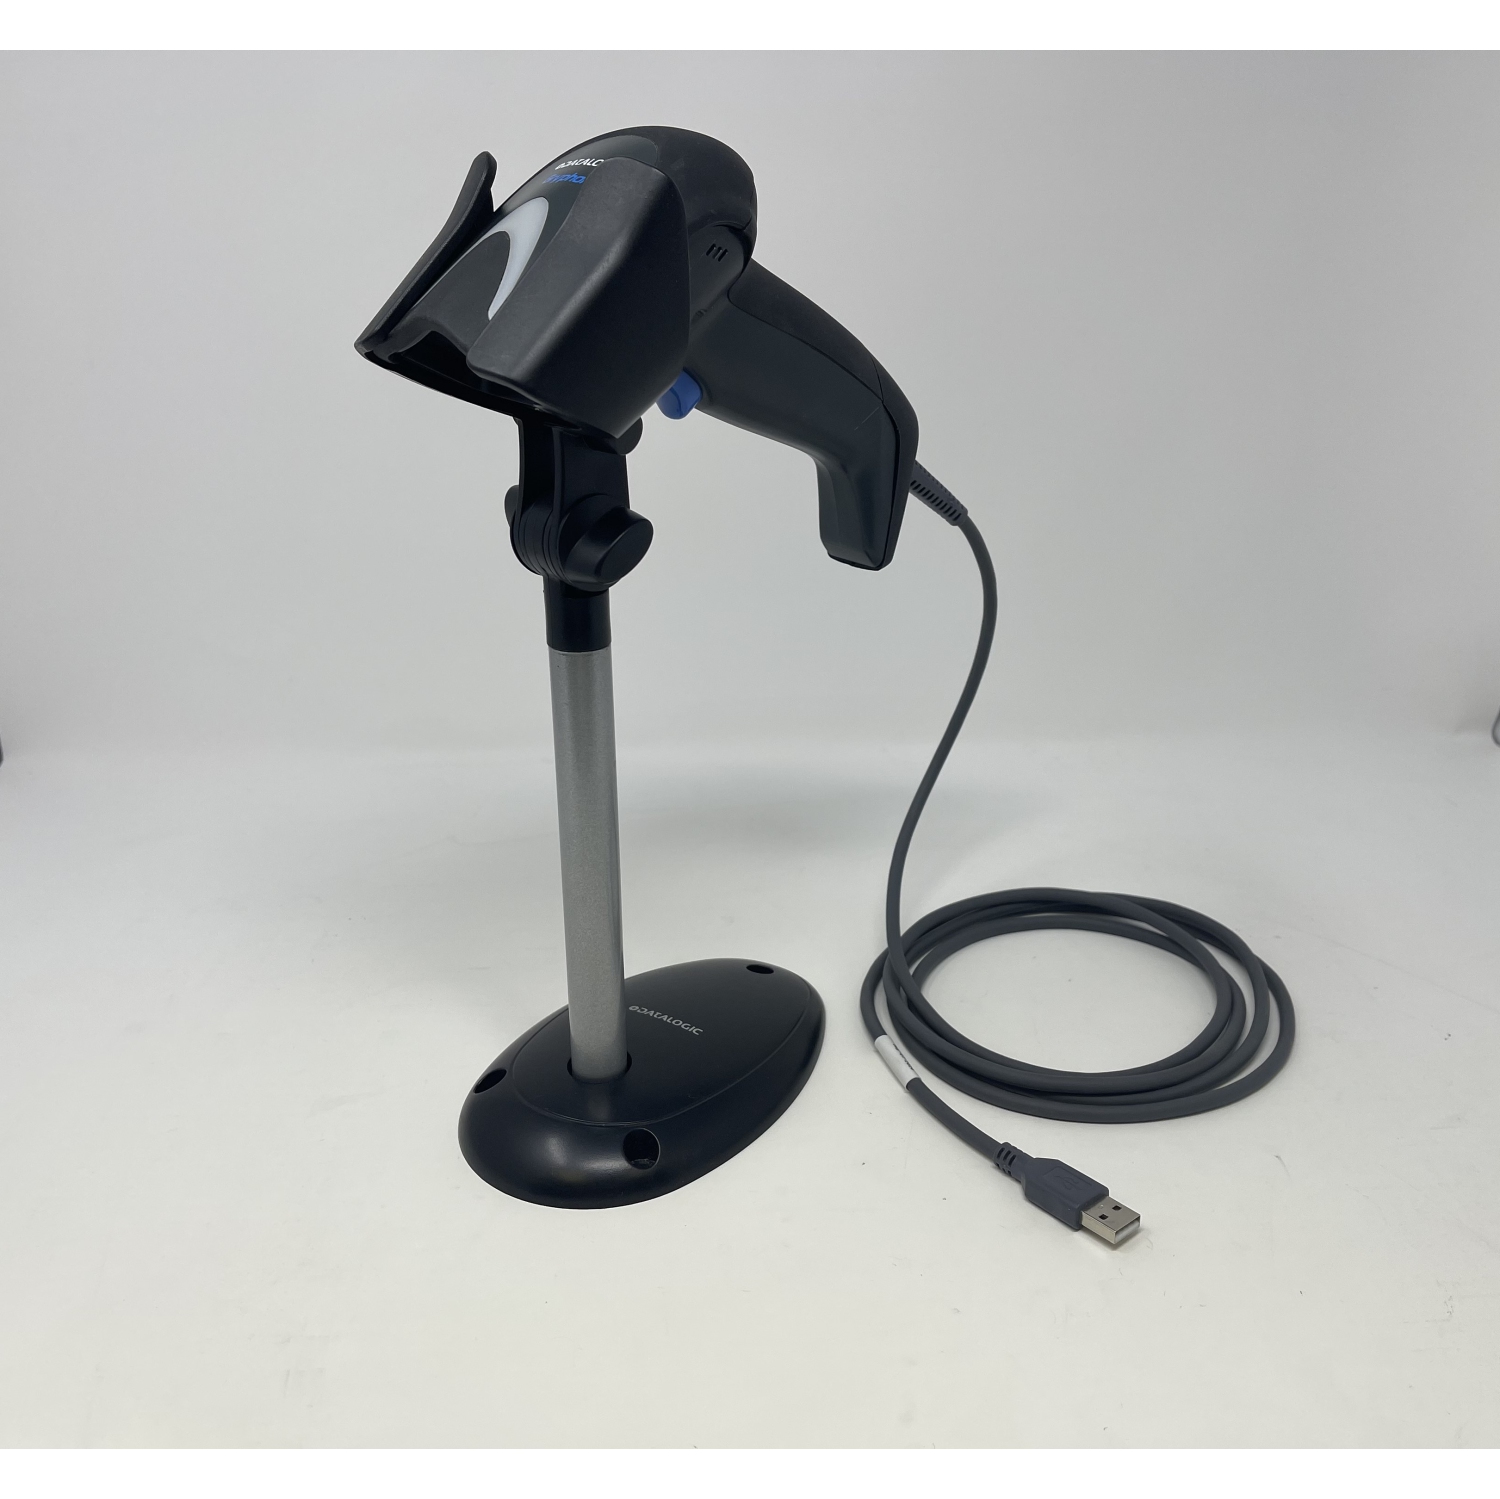 Refurbished (Good) - DATALOGIC GD4130-BK BARCODE SCANNER With Cable and  STAND